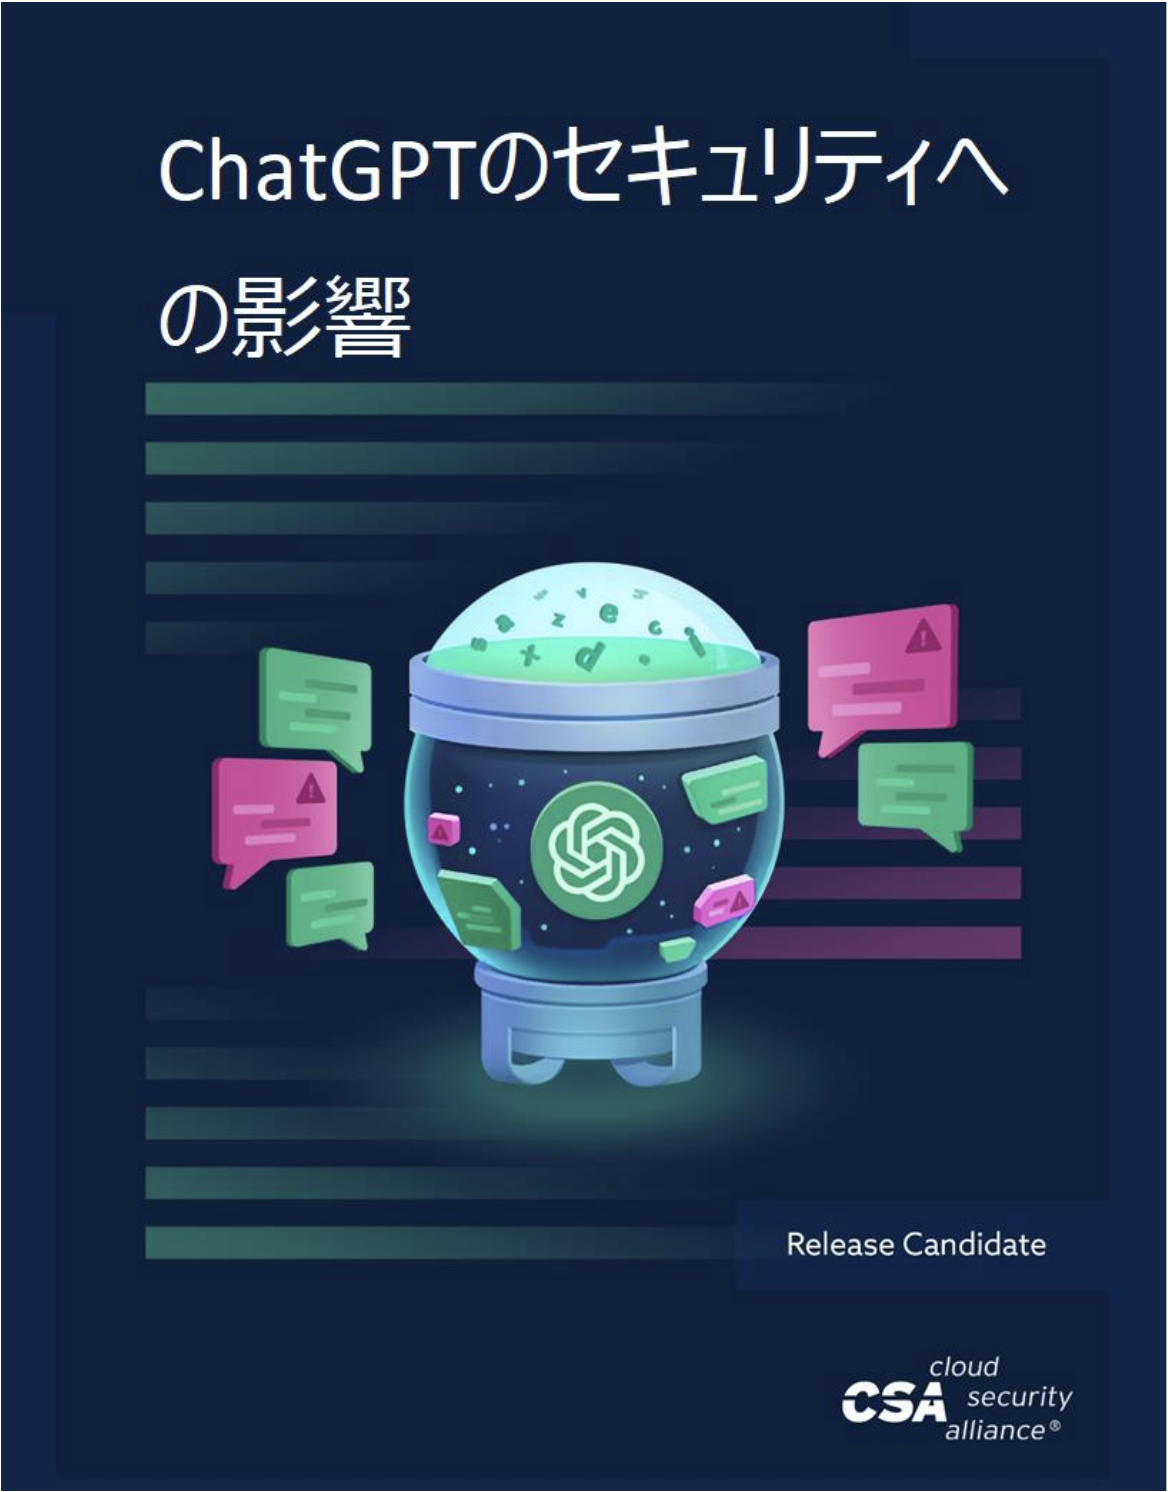 Security Implications of ChatGPT - Japanese Translation